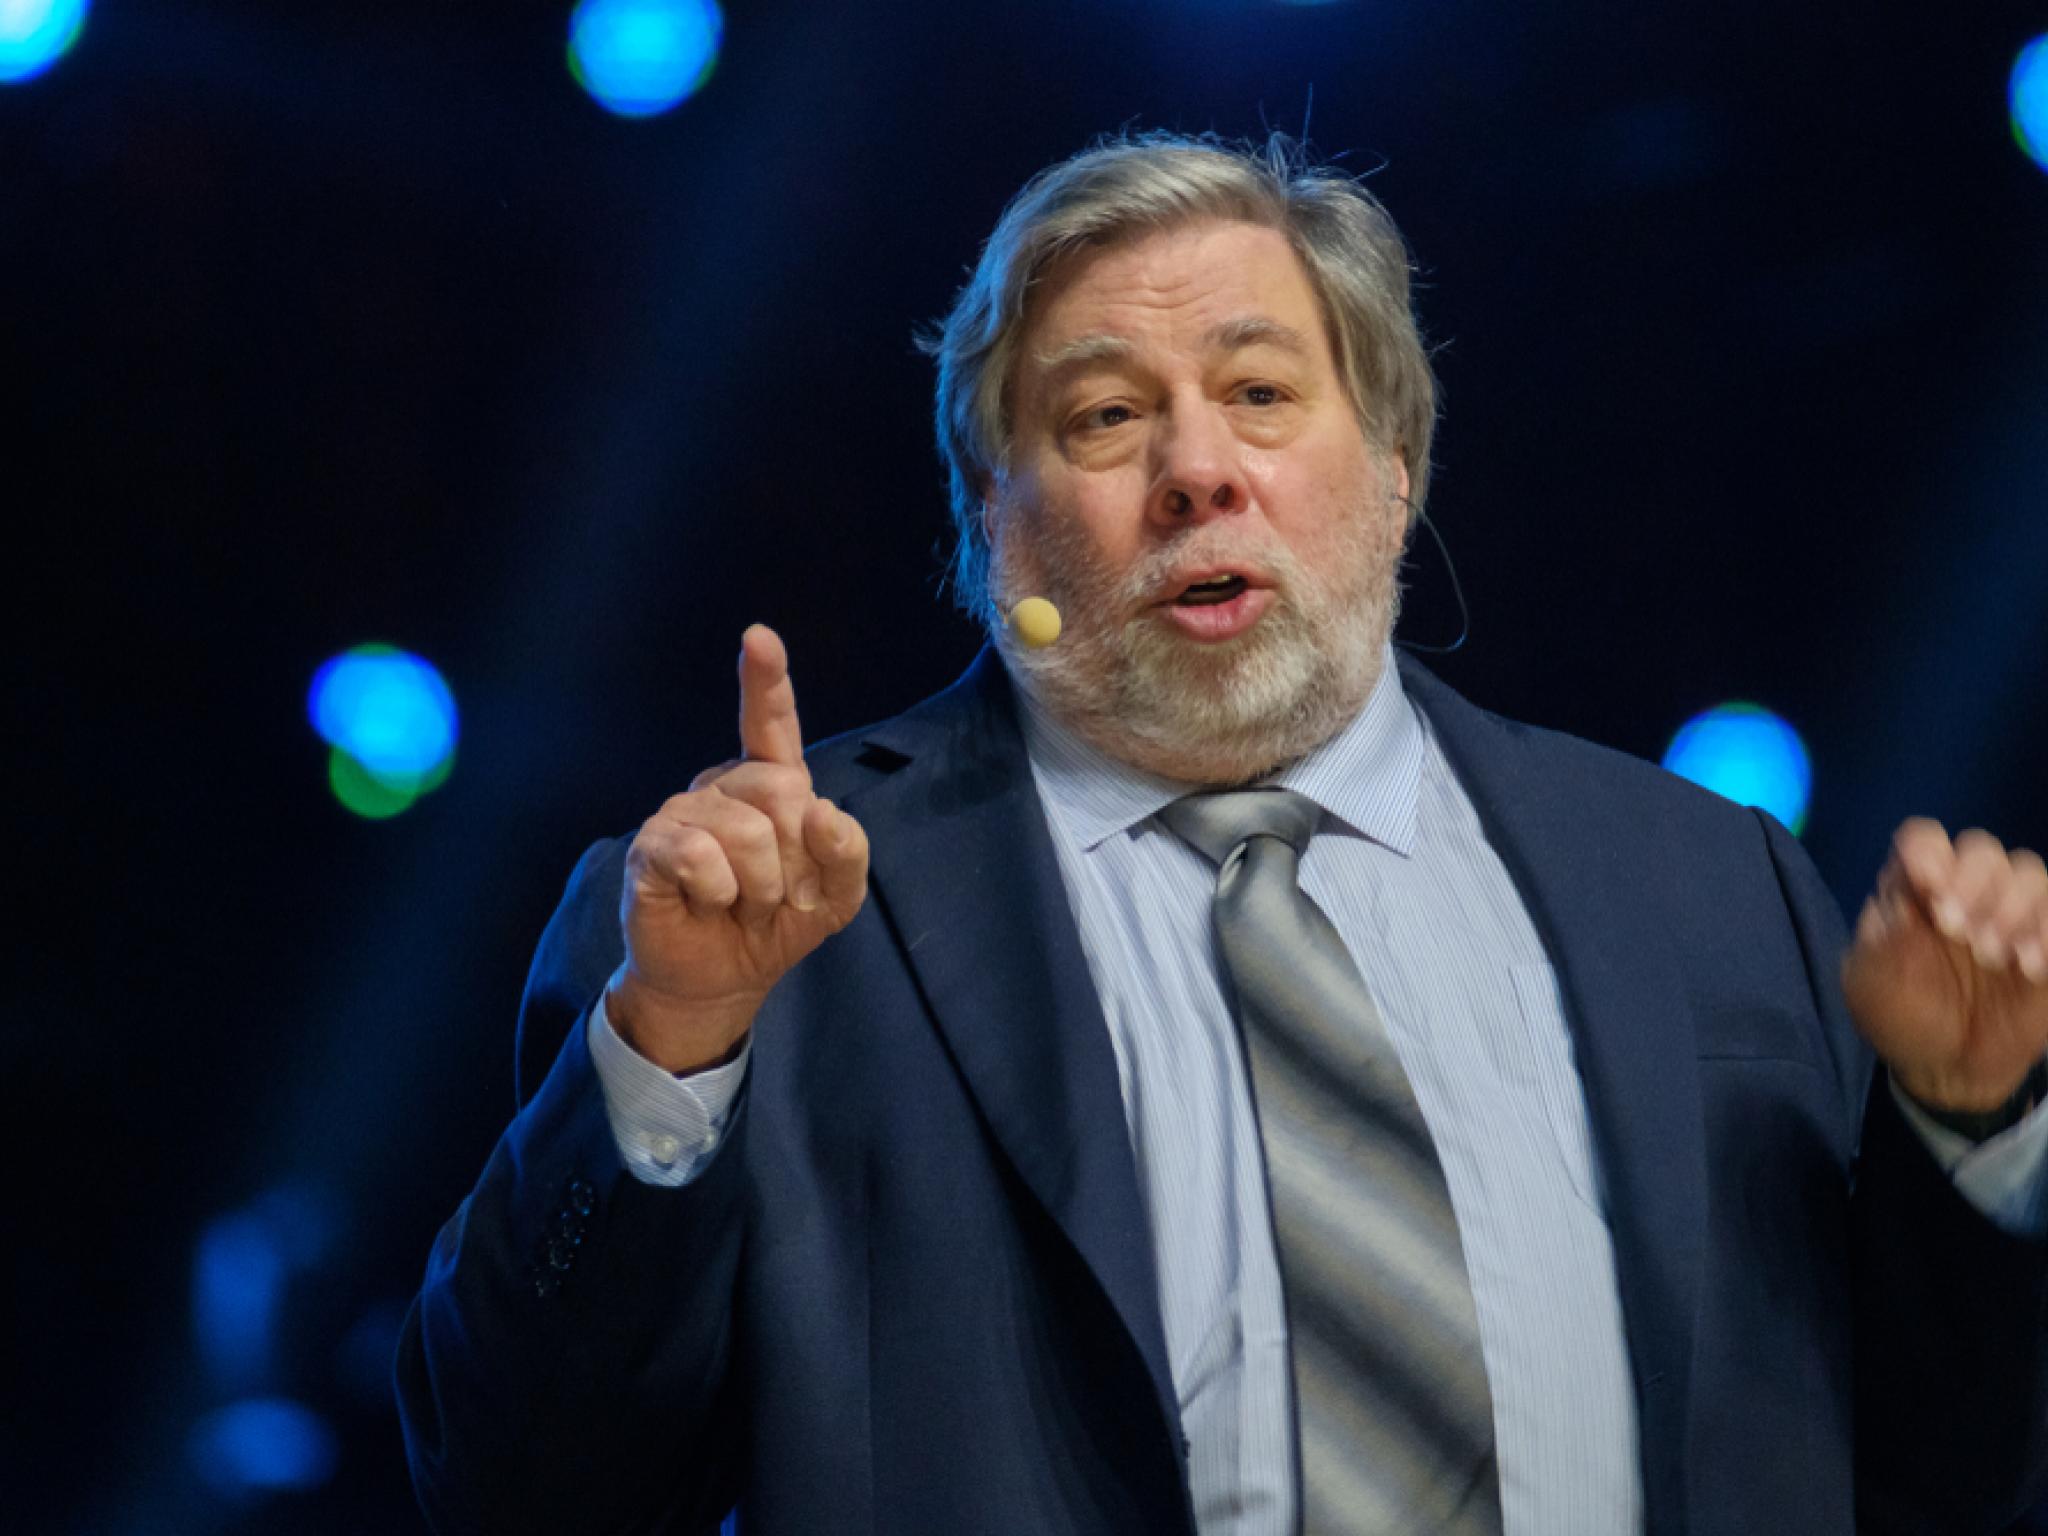  apple-co-founder-steve-wozniak-warns-not-to-get-swept-up-with-wwdc-ai-demos-try-it-yourself-see-how-it-works-for-you 